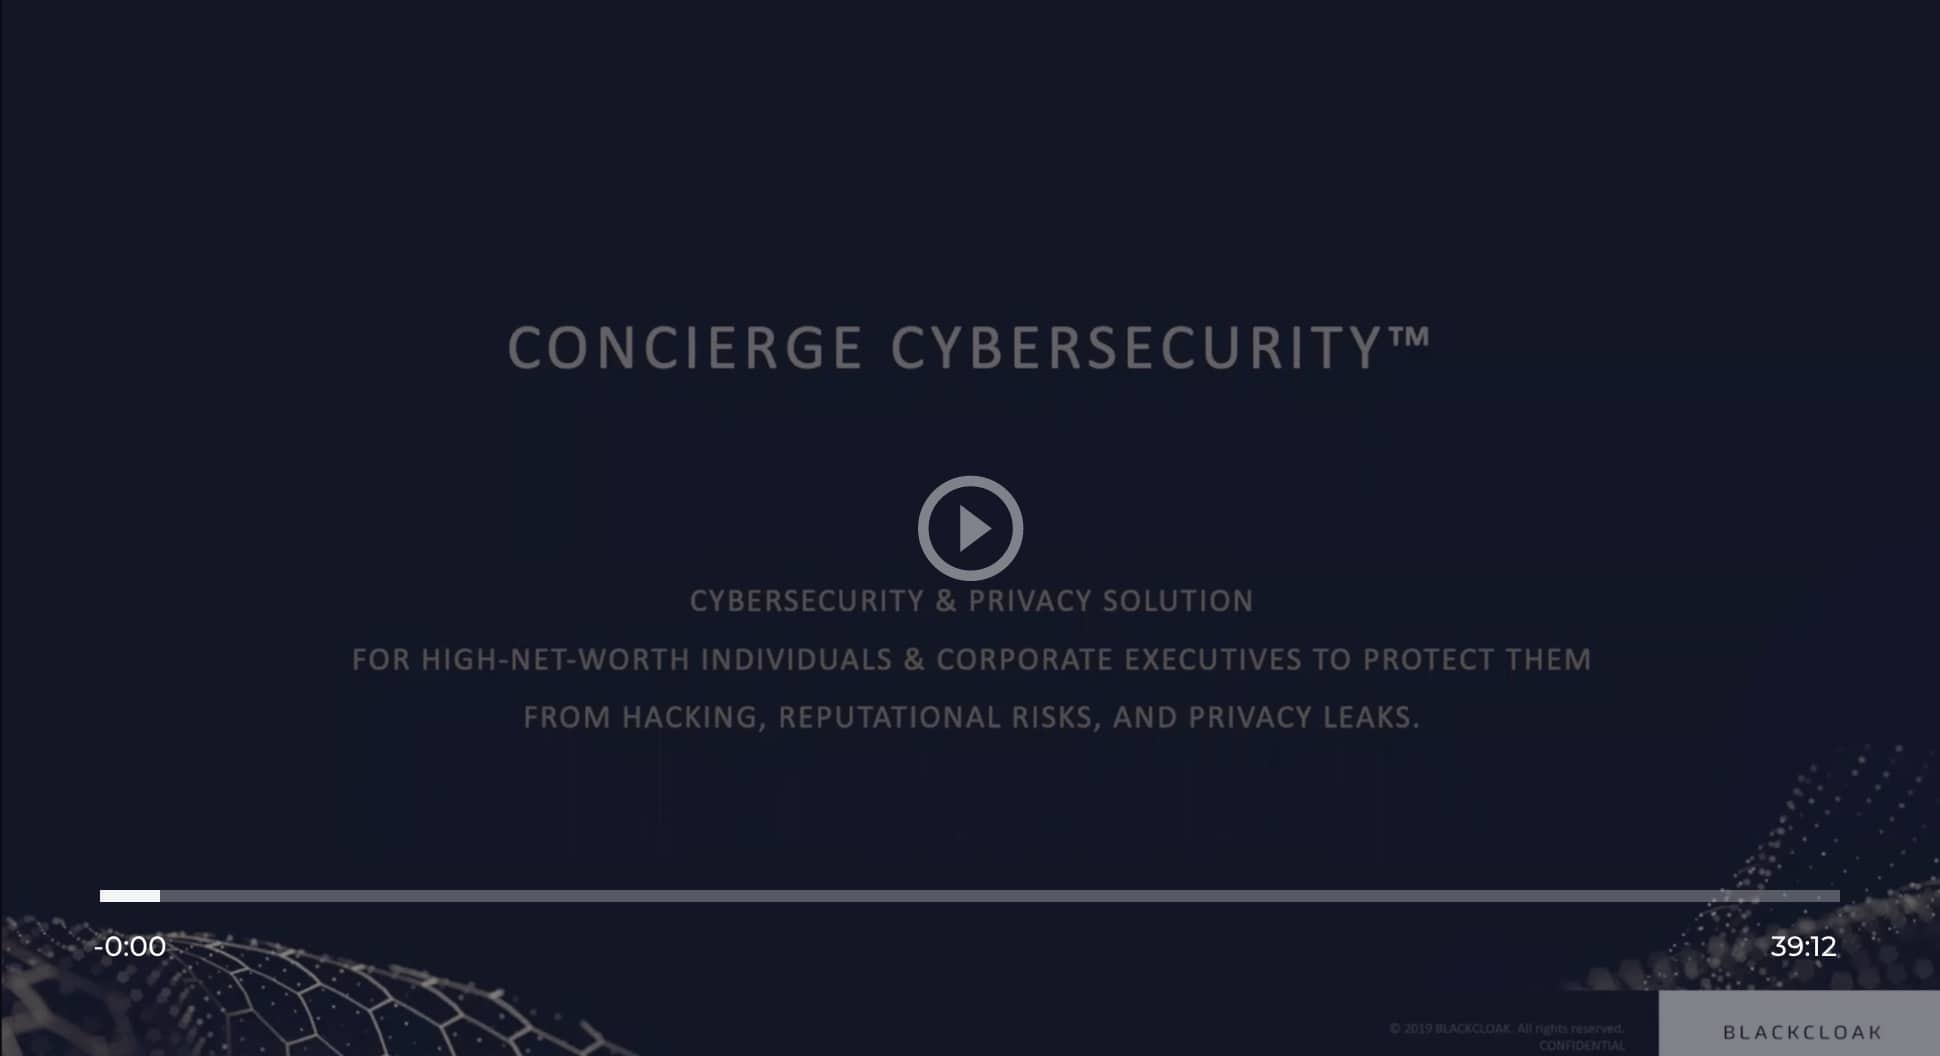 Webinar on protecting hedge fund executives from cyber attacks